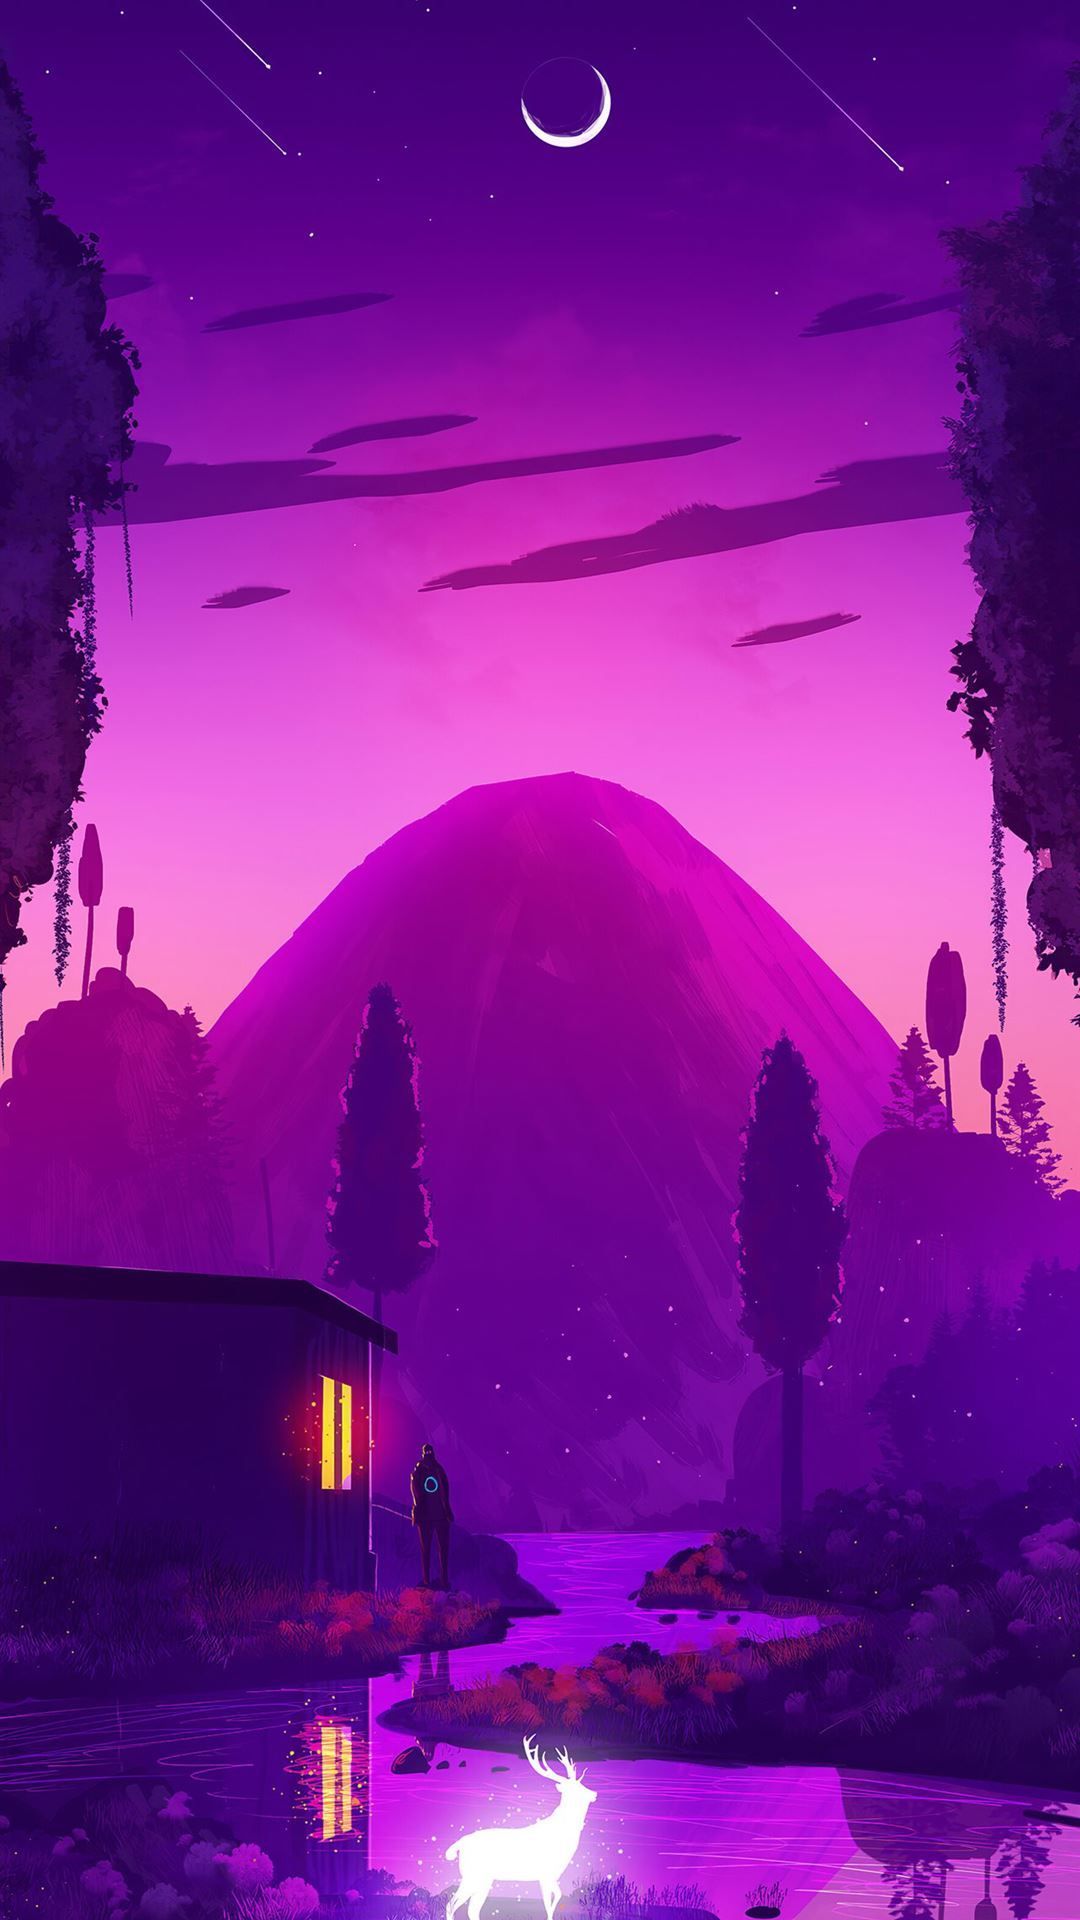 A purple and pink landscape with a deer, a person, and a house. - Fortnite